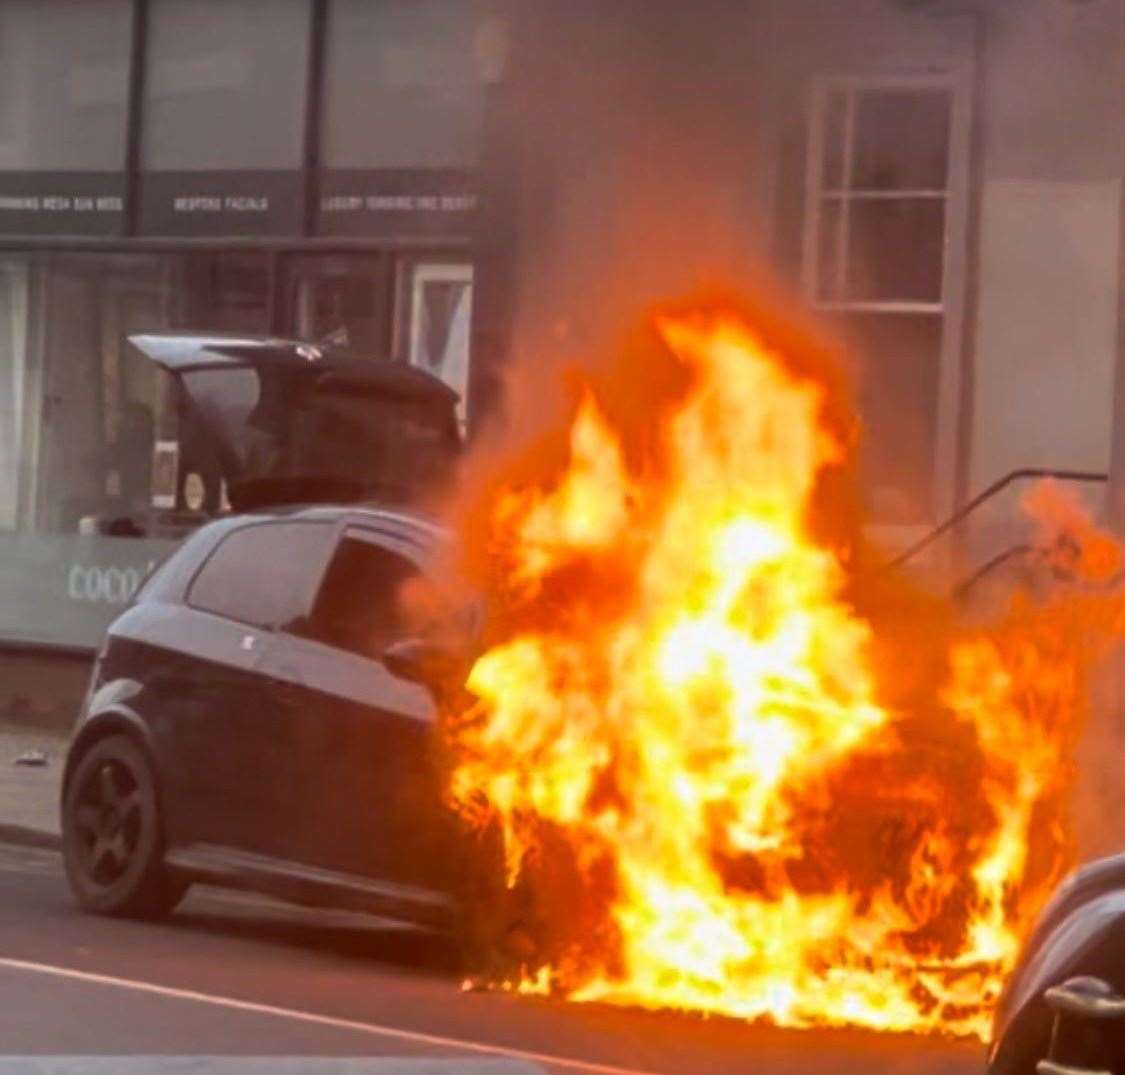 A car burst into flames in Herne Bay's High Street. Pic: Paul Surgison